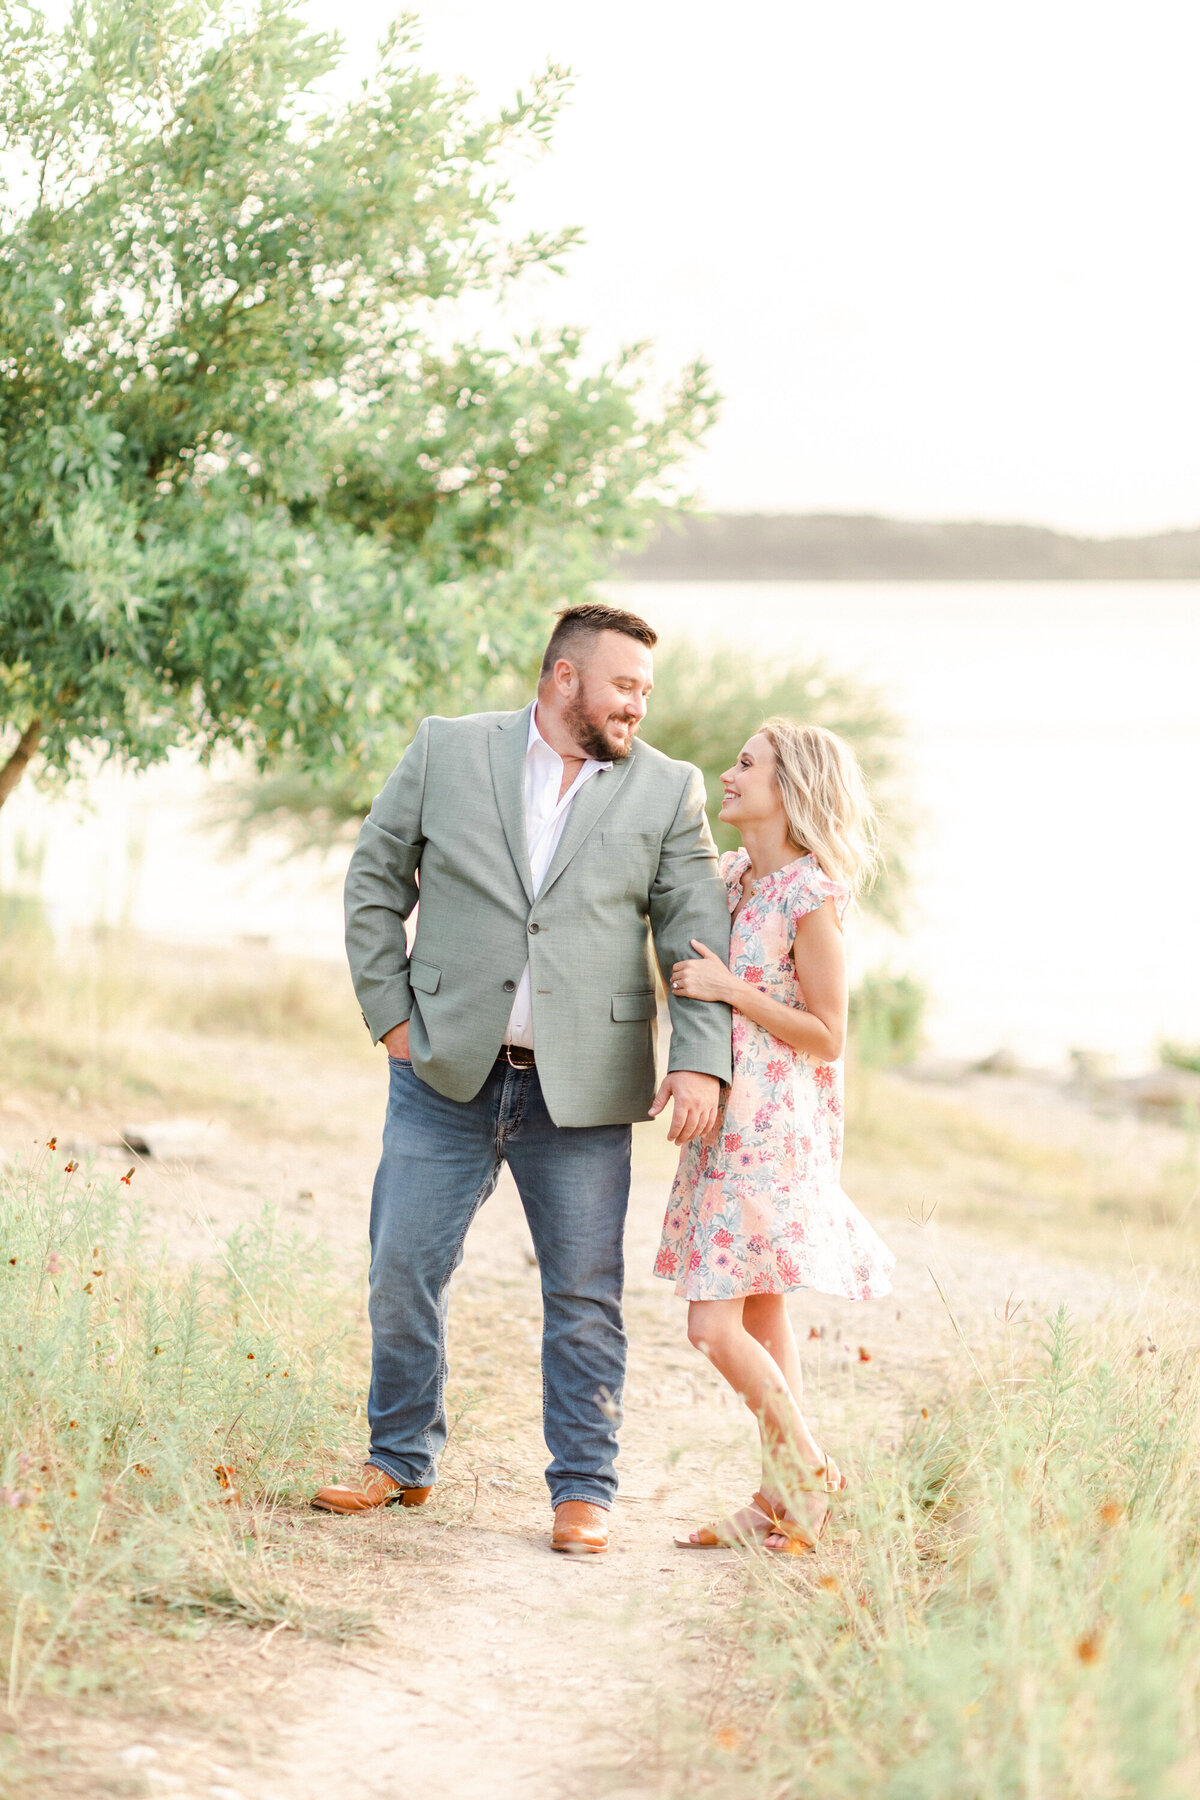 Jessica Chole Photography San Antonio Texas California Wedding Portrait Engagement Maternity Family Lifestyle Photographer Souther Cali TX CA Light Airy Bright Colorful Photography30